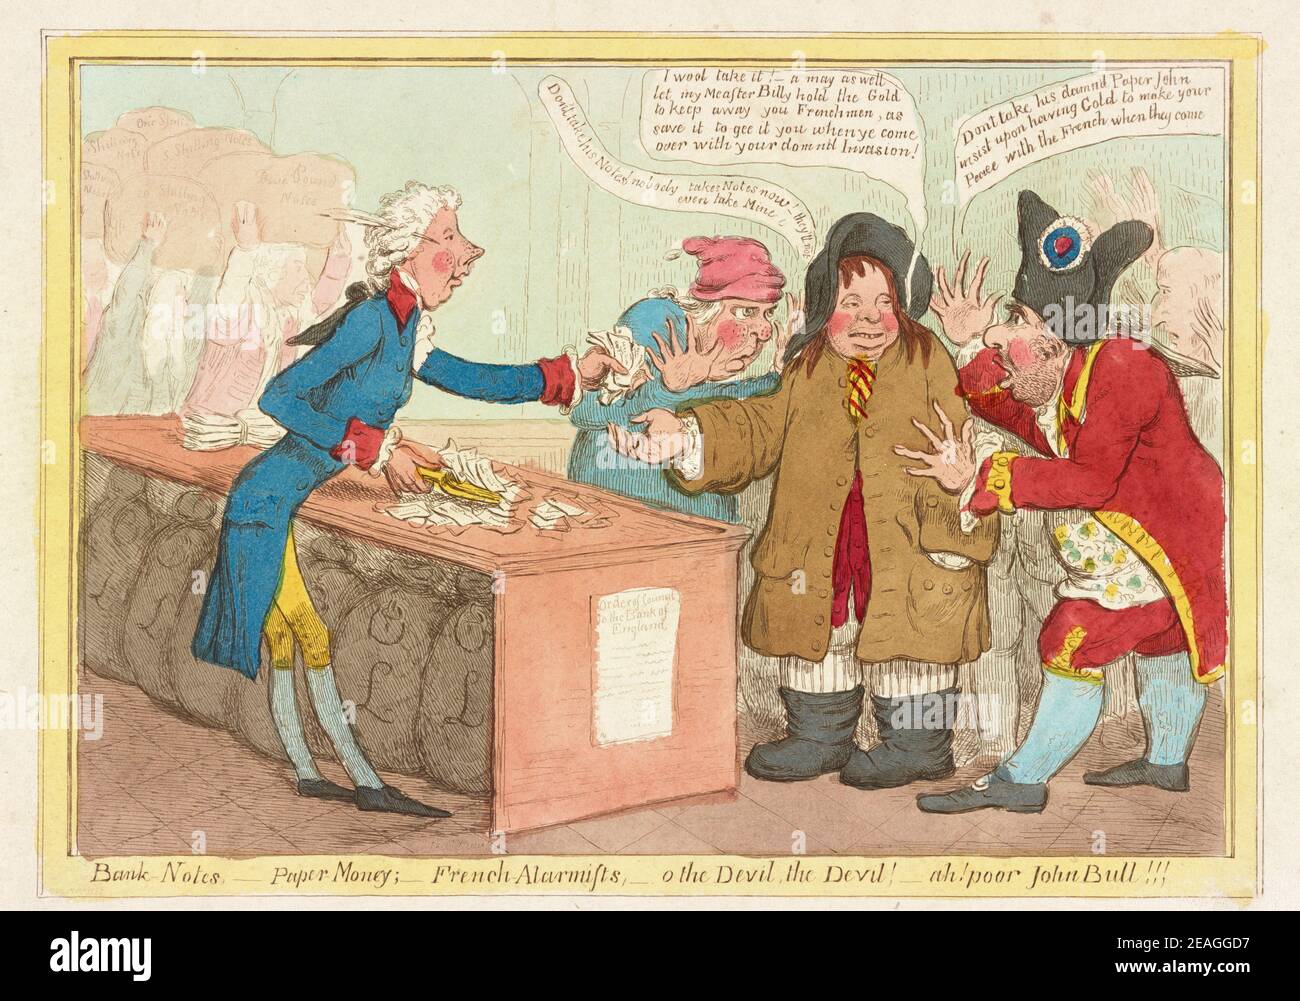 Bank-notes, paper-money, French-alarmist, O, The devil, the devil!--Ah! Poor John-Bull!! By artist James Gillray. William Pitt the Younger as a bank-clerk offering a handful of bank-notes to John Bull, who holds out his hand for the notes as Charles James Fox says to him 'Dont take his damn'd Paper, John! insist upon having Gold, to make your Peace with the French, when they come' and Richard Brinsley Sheridan says 'Dont take his Notes! nobody takes Notes now! - they'll not even take Mine!' Stock Photo